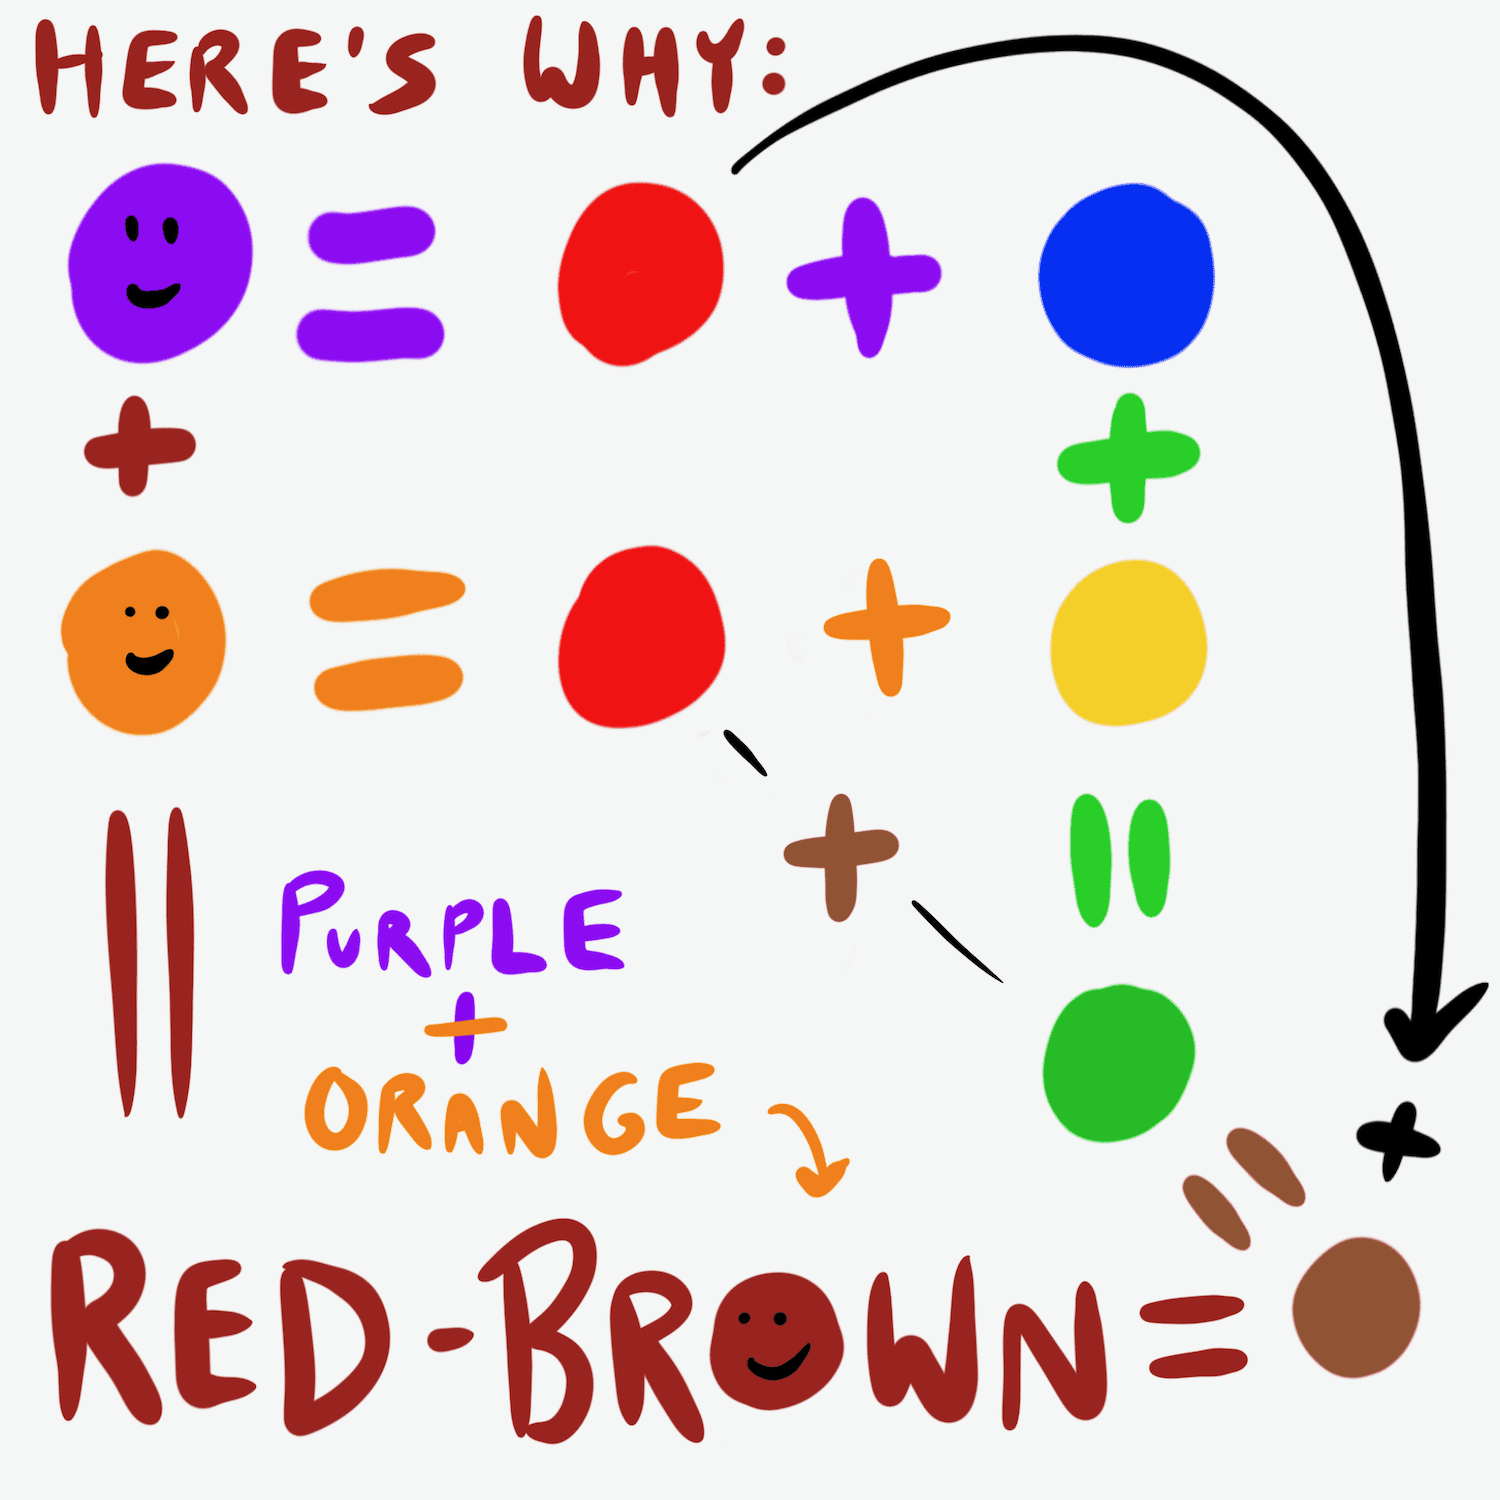 The color science behind why purple and orange make reddish-brown.